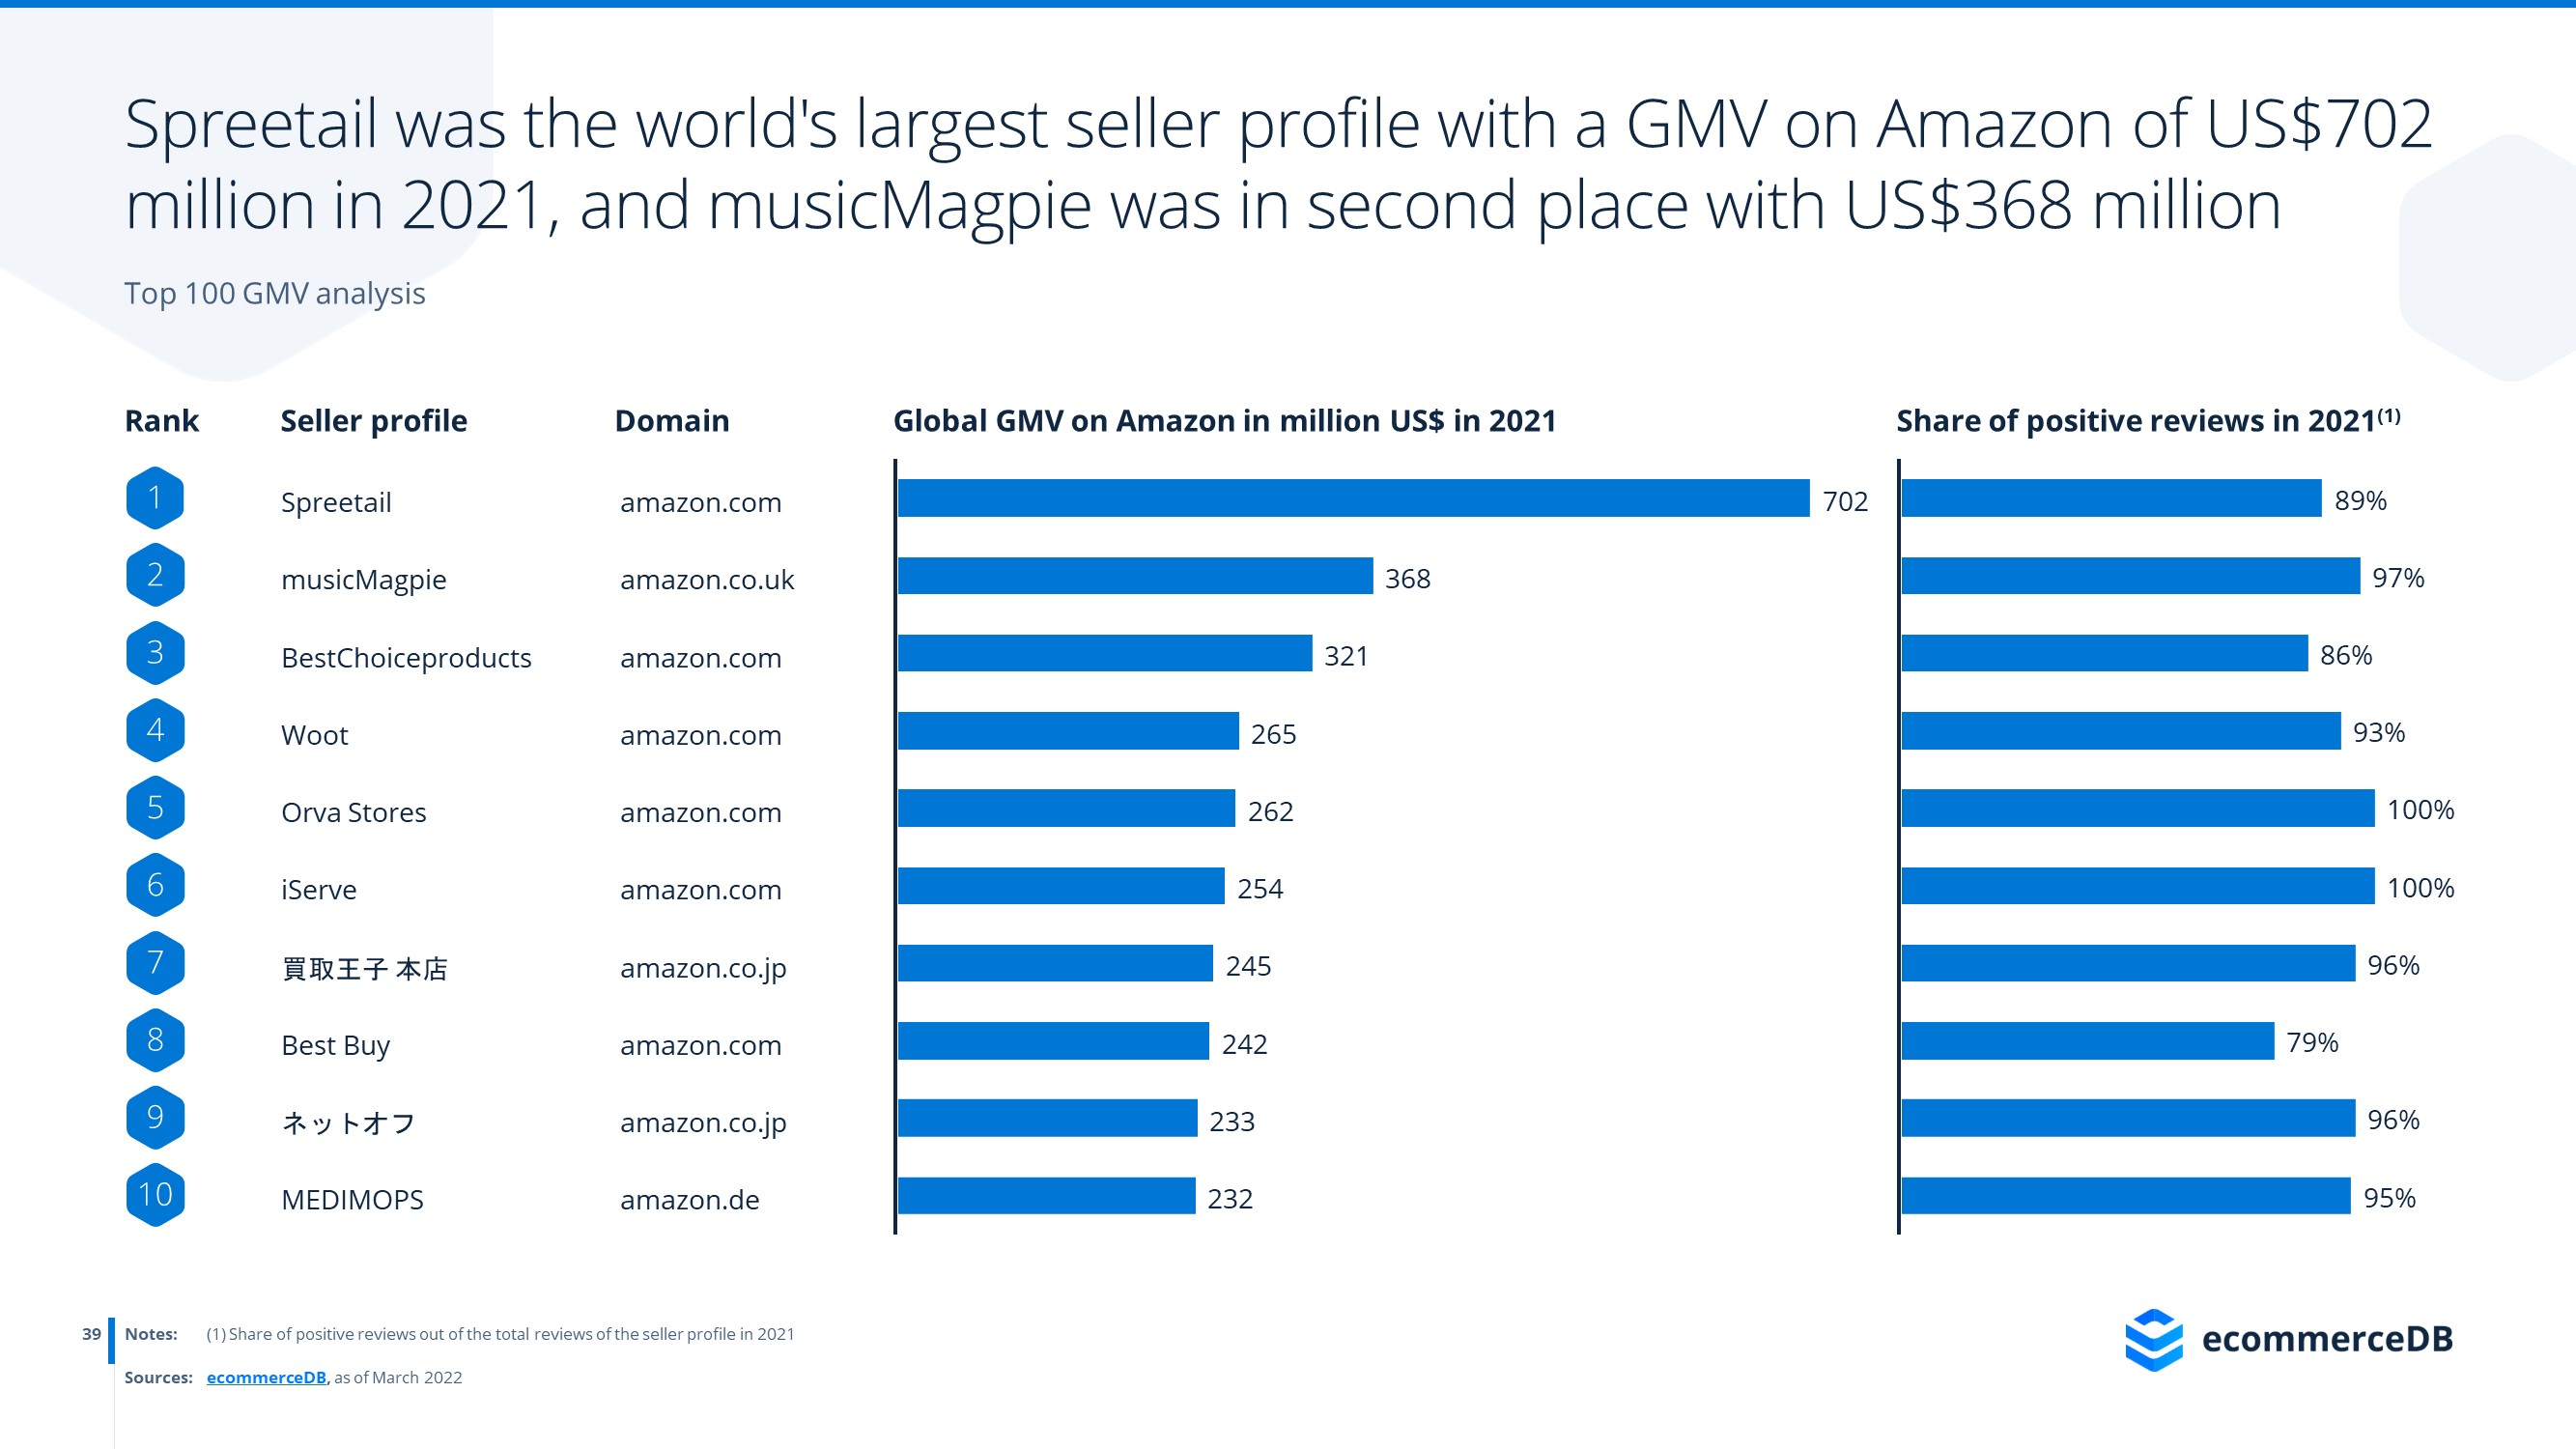 ecommerceDB Infographic: Amazon_sellers_marketplace_insights_GMV_data_top_sellers_3.jpg